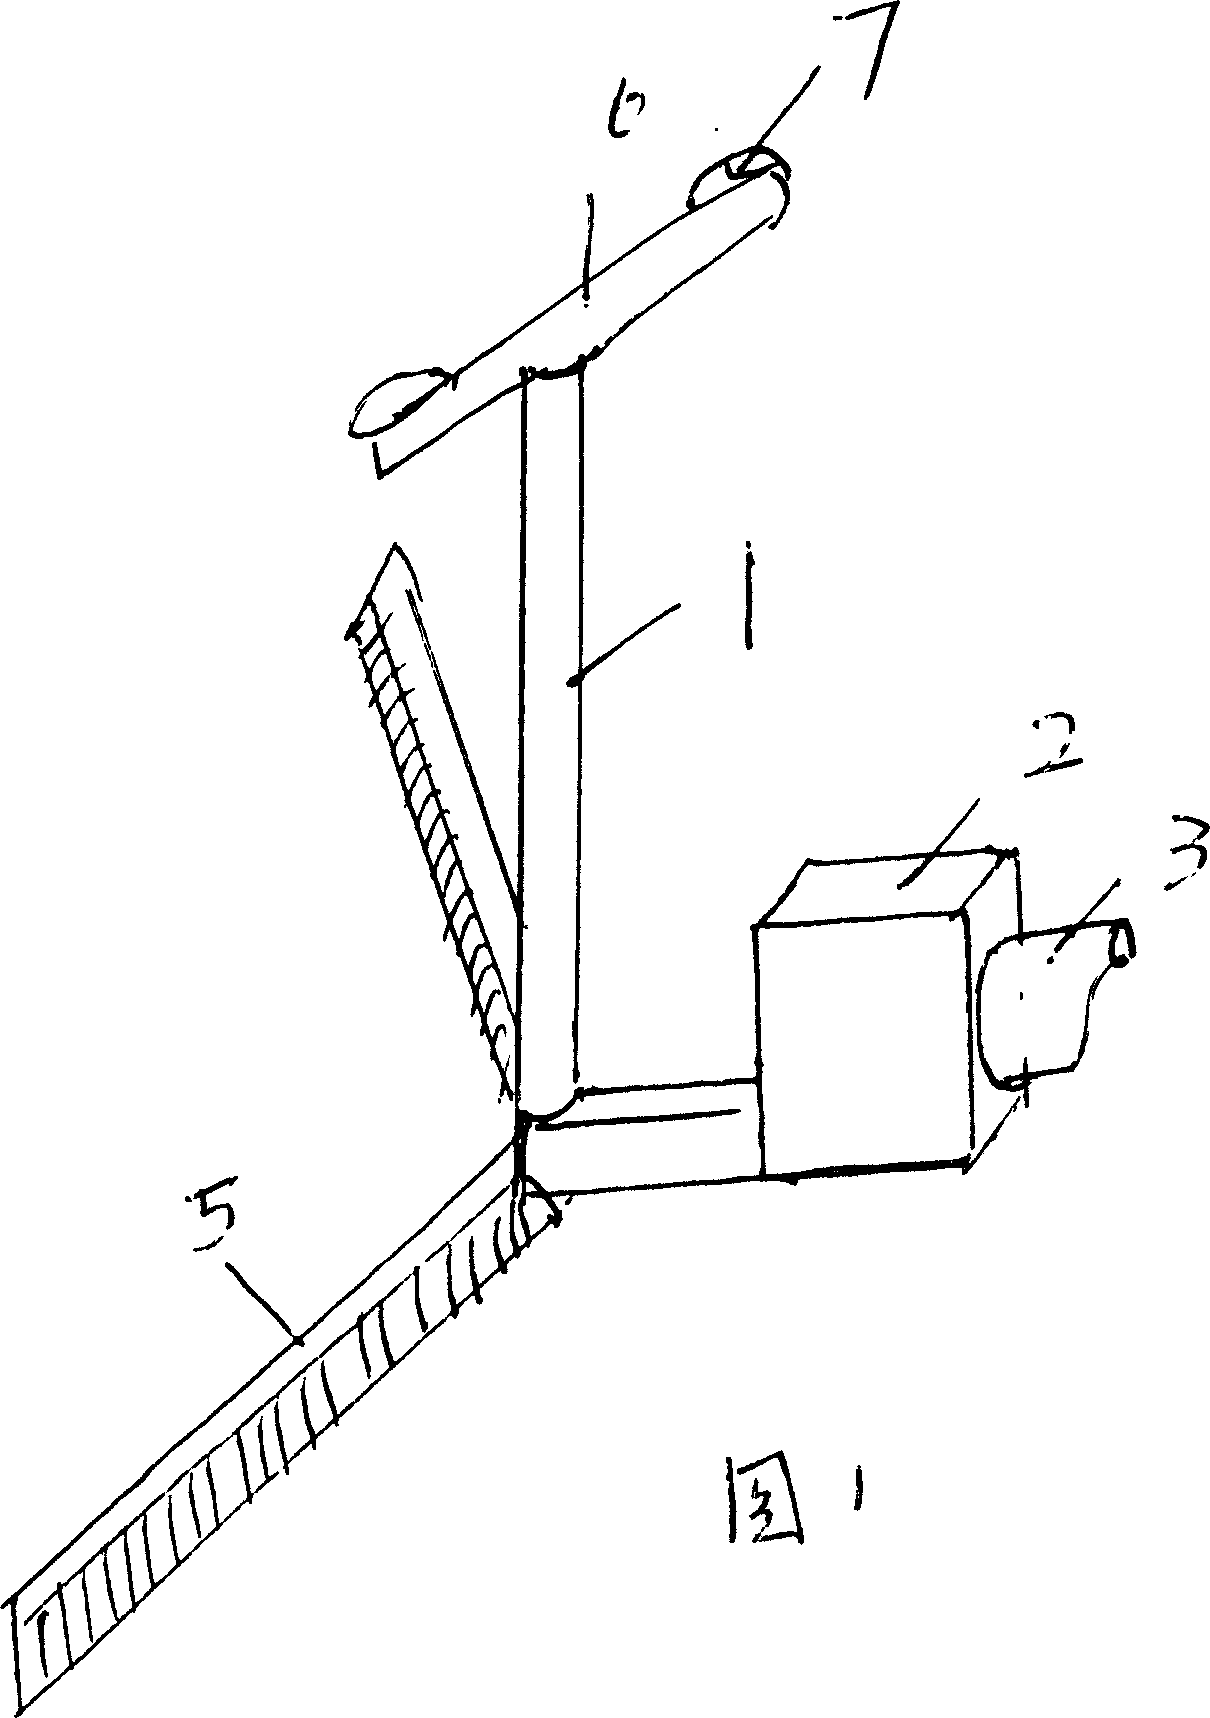 Ball picking device for court